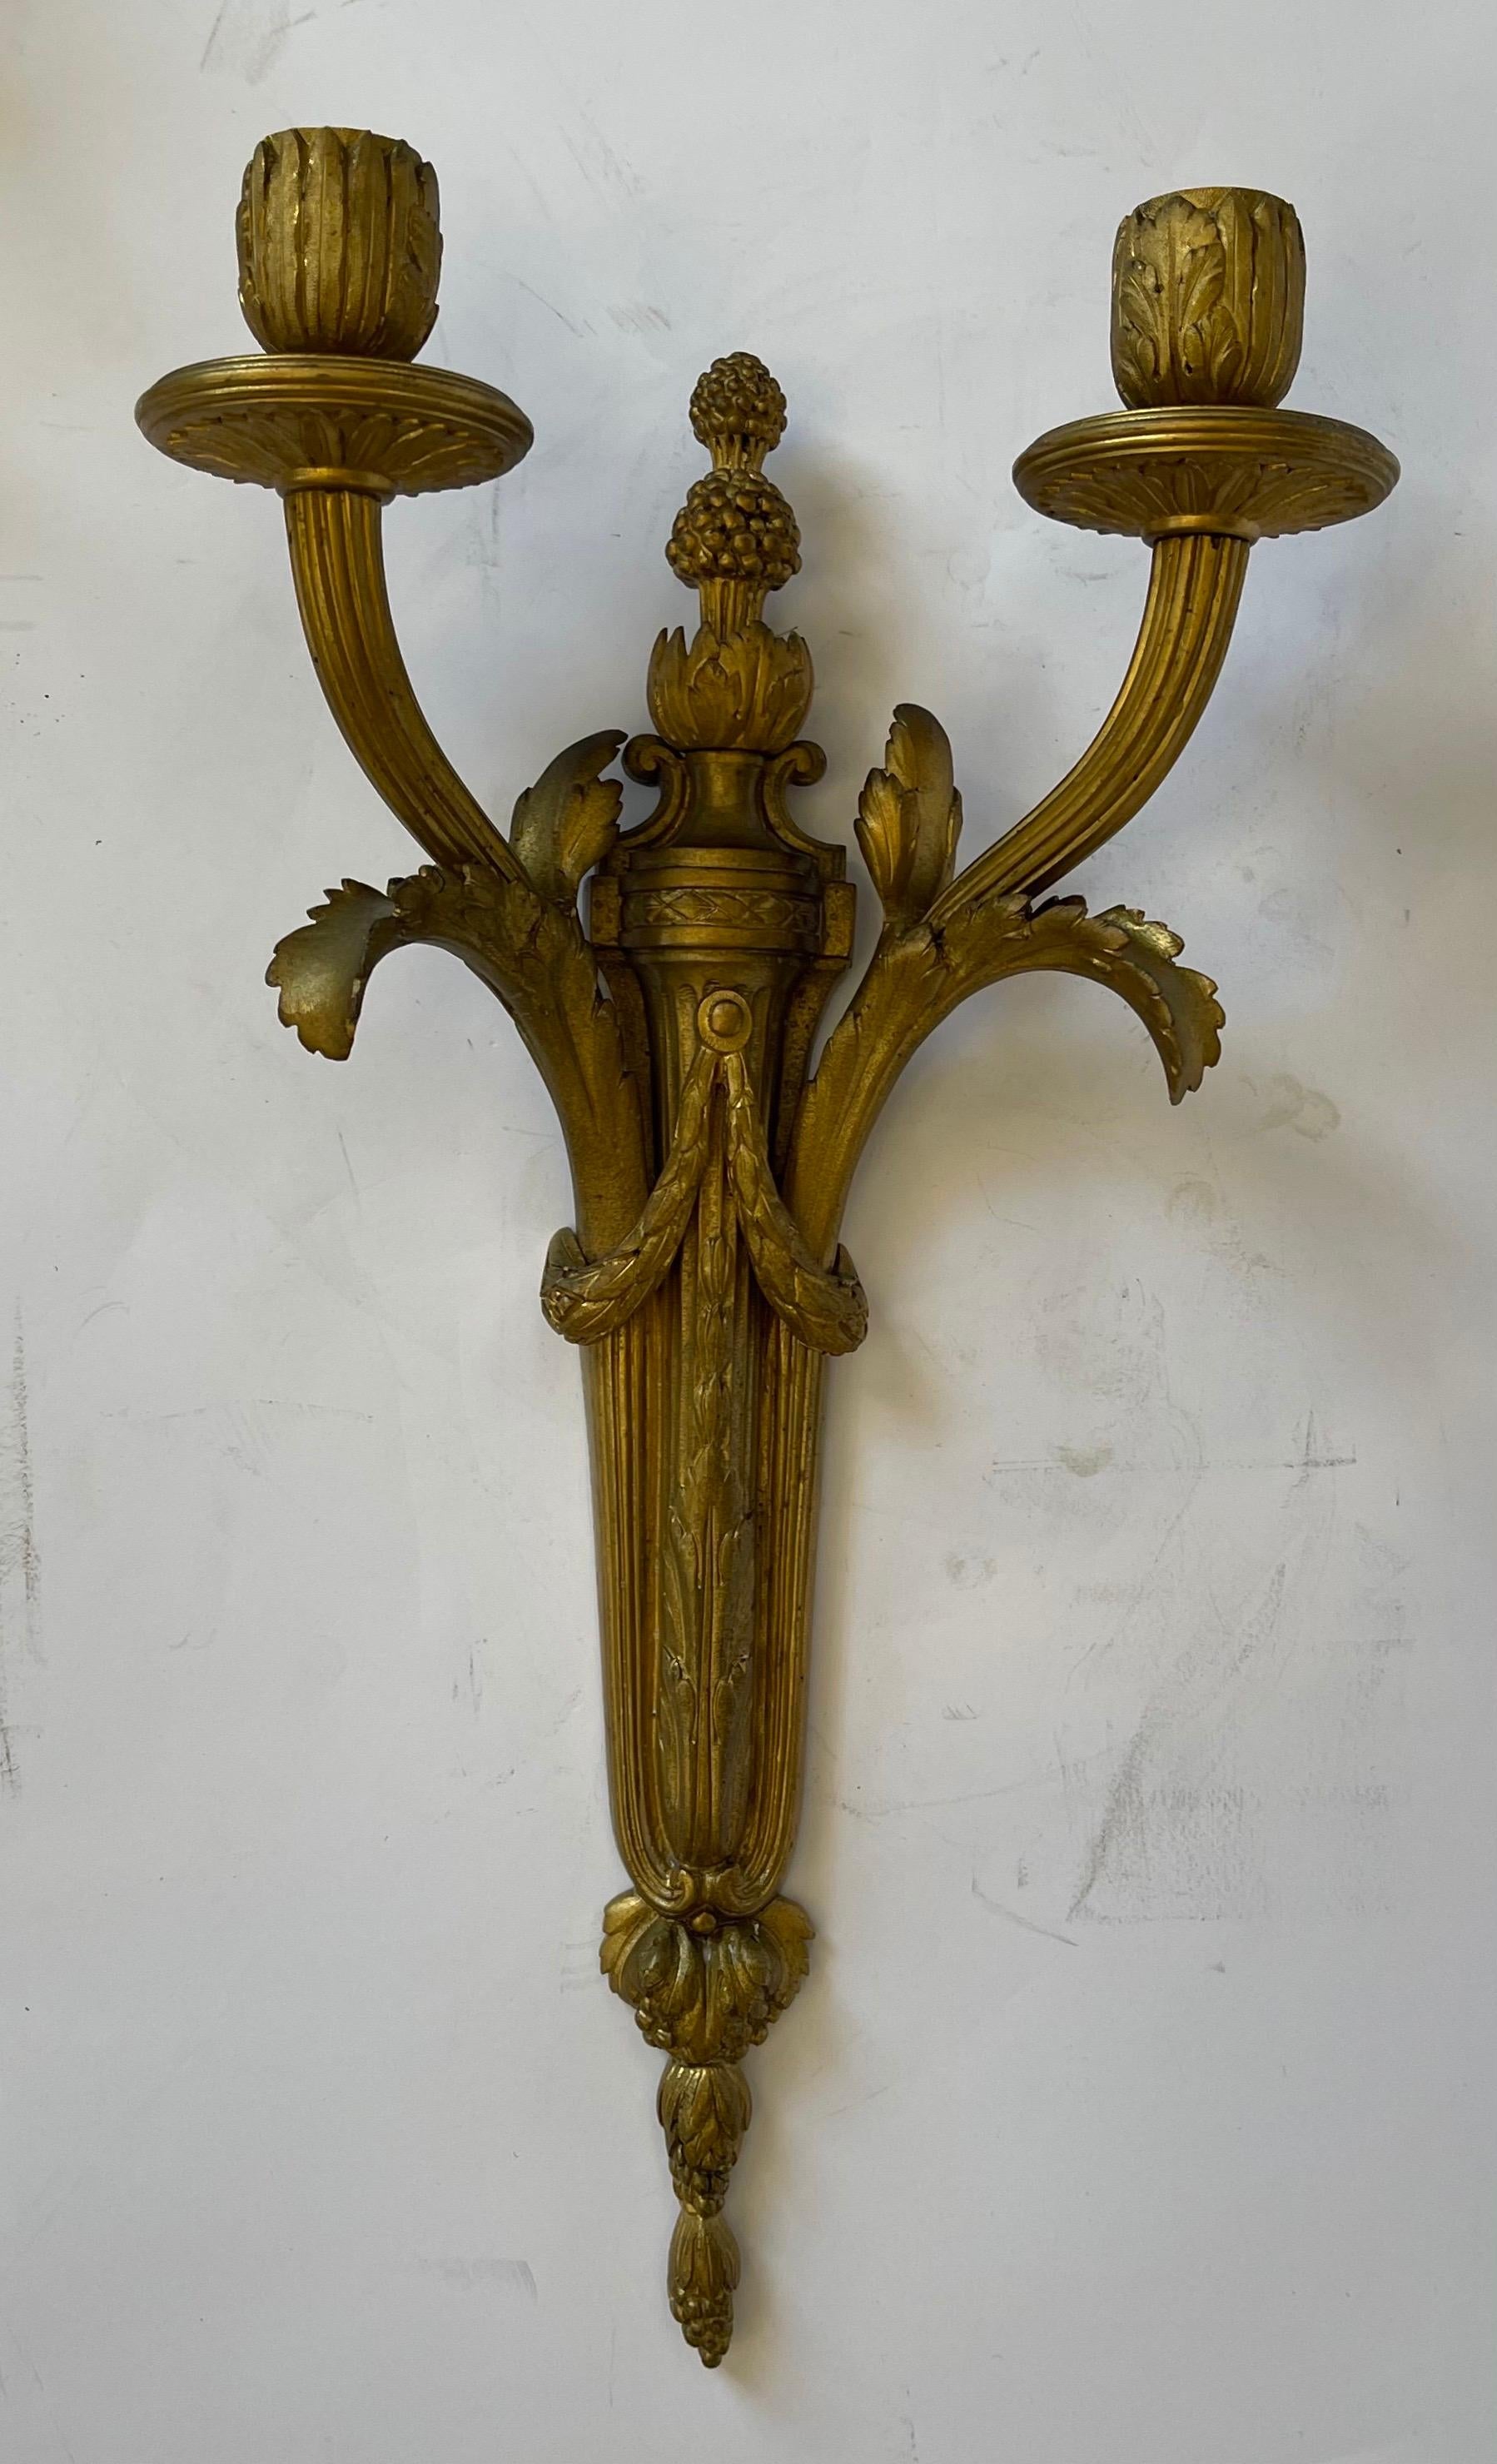 A fine French neoclassical / Regency bronze Empire two arm swag urn two arm sconces,
We are happy to have the sconces wired for you if required.